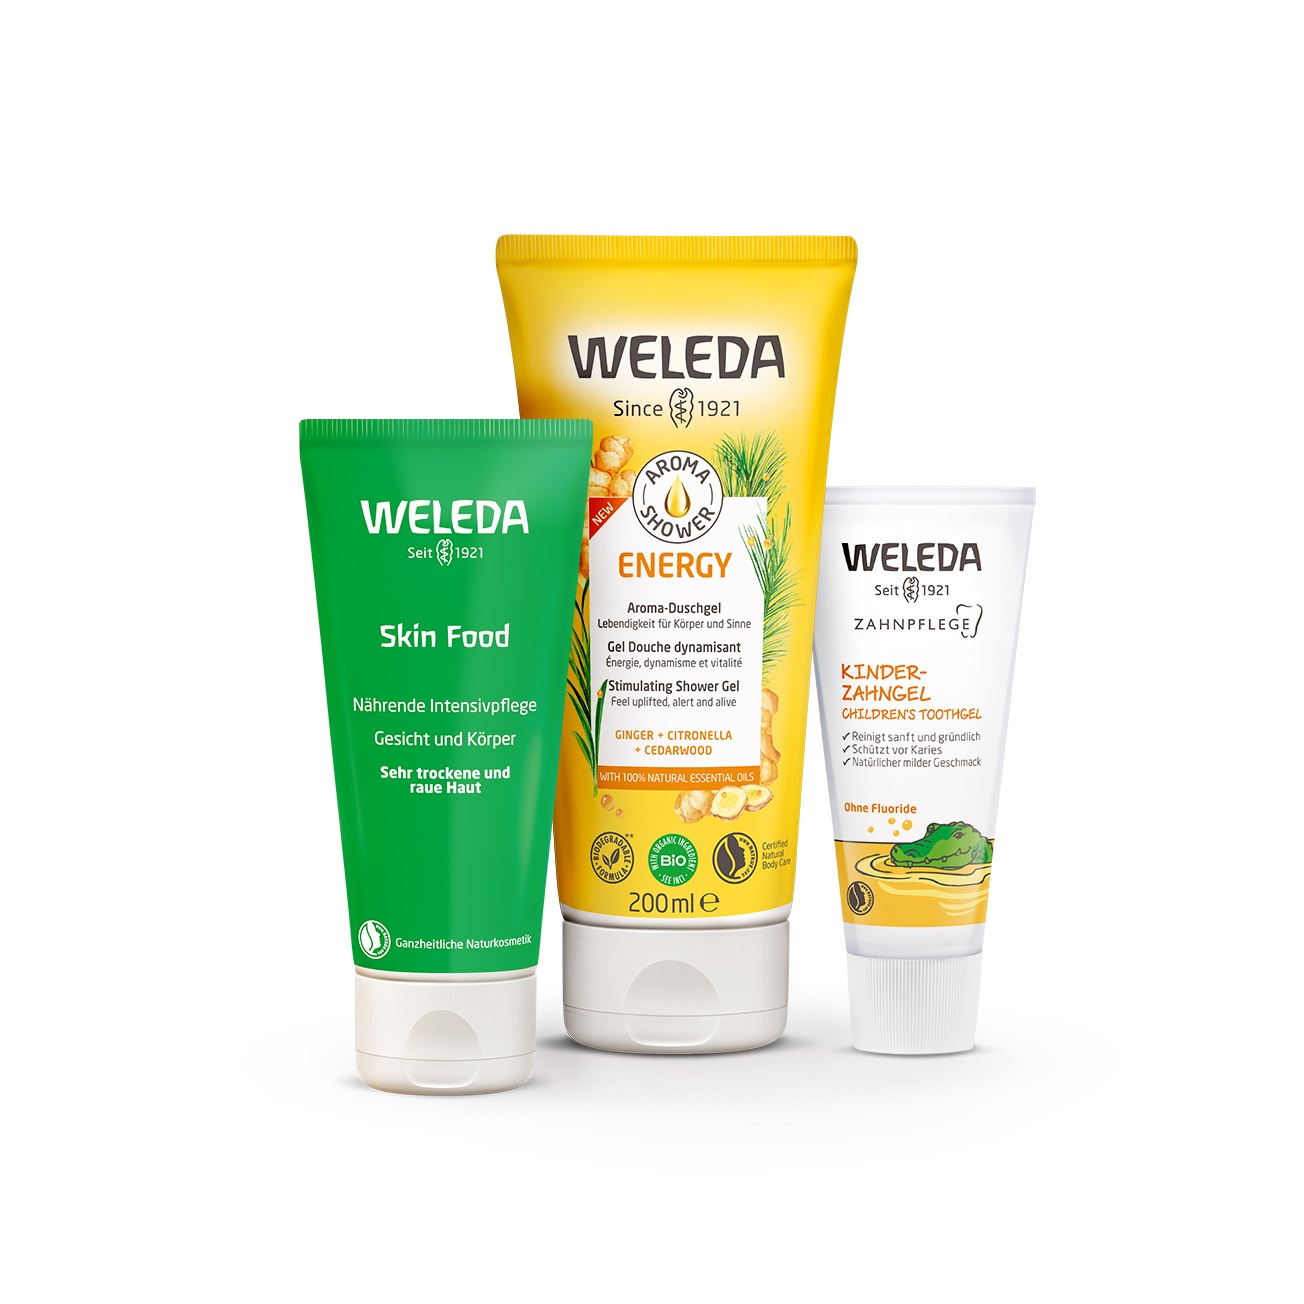 All Weleda products